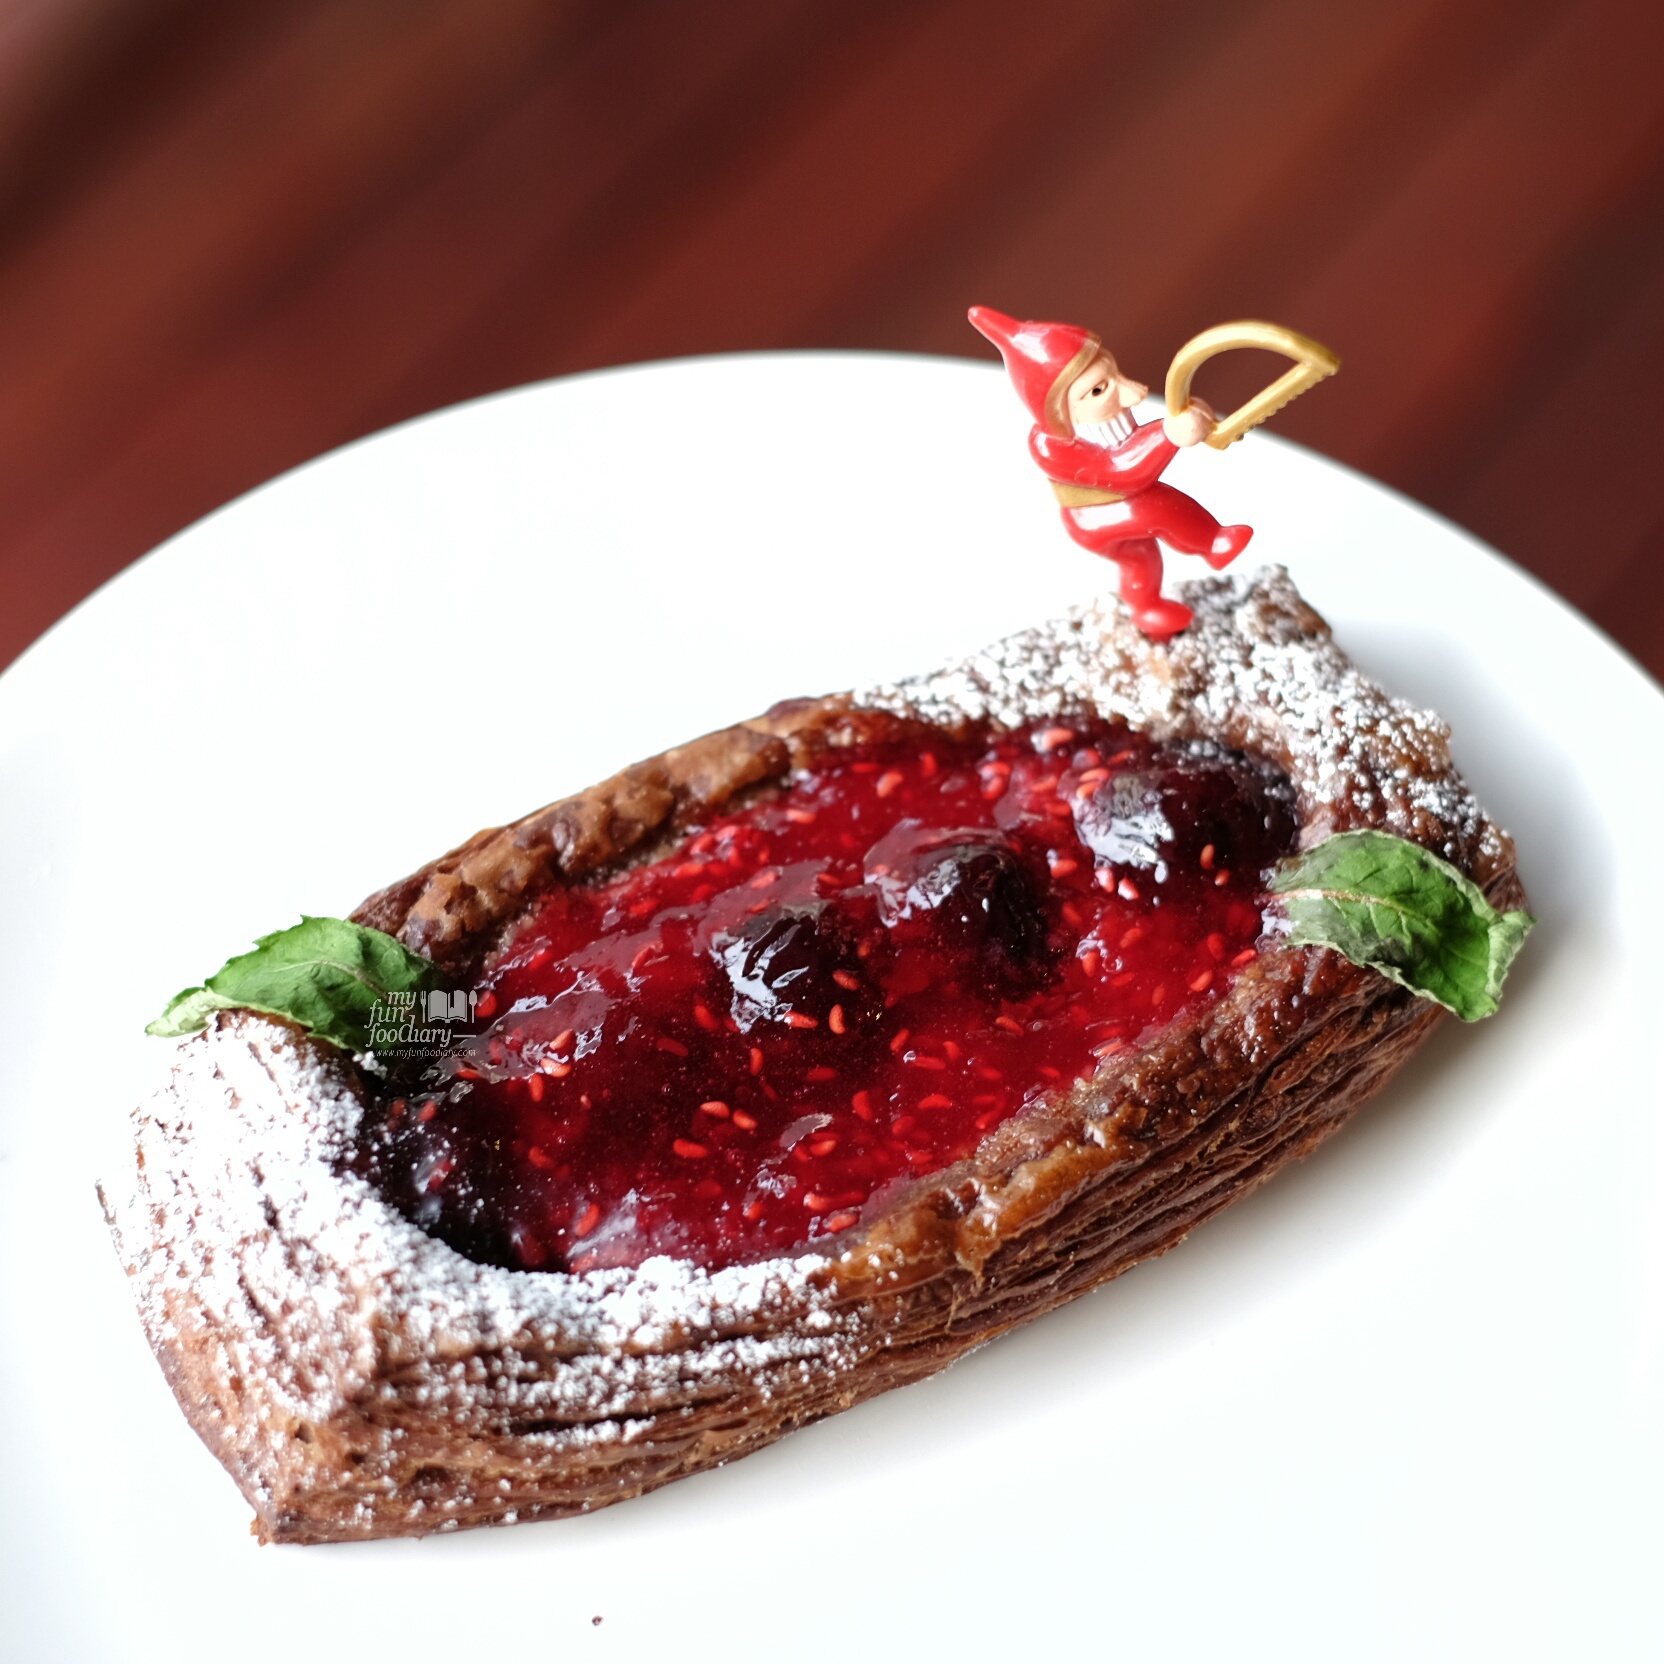 Xmas Danish Berry at Del' Immo Patisserie and Cafe by Myfunfoodiary -1